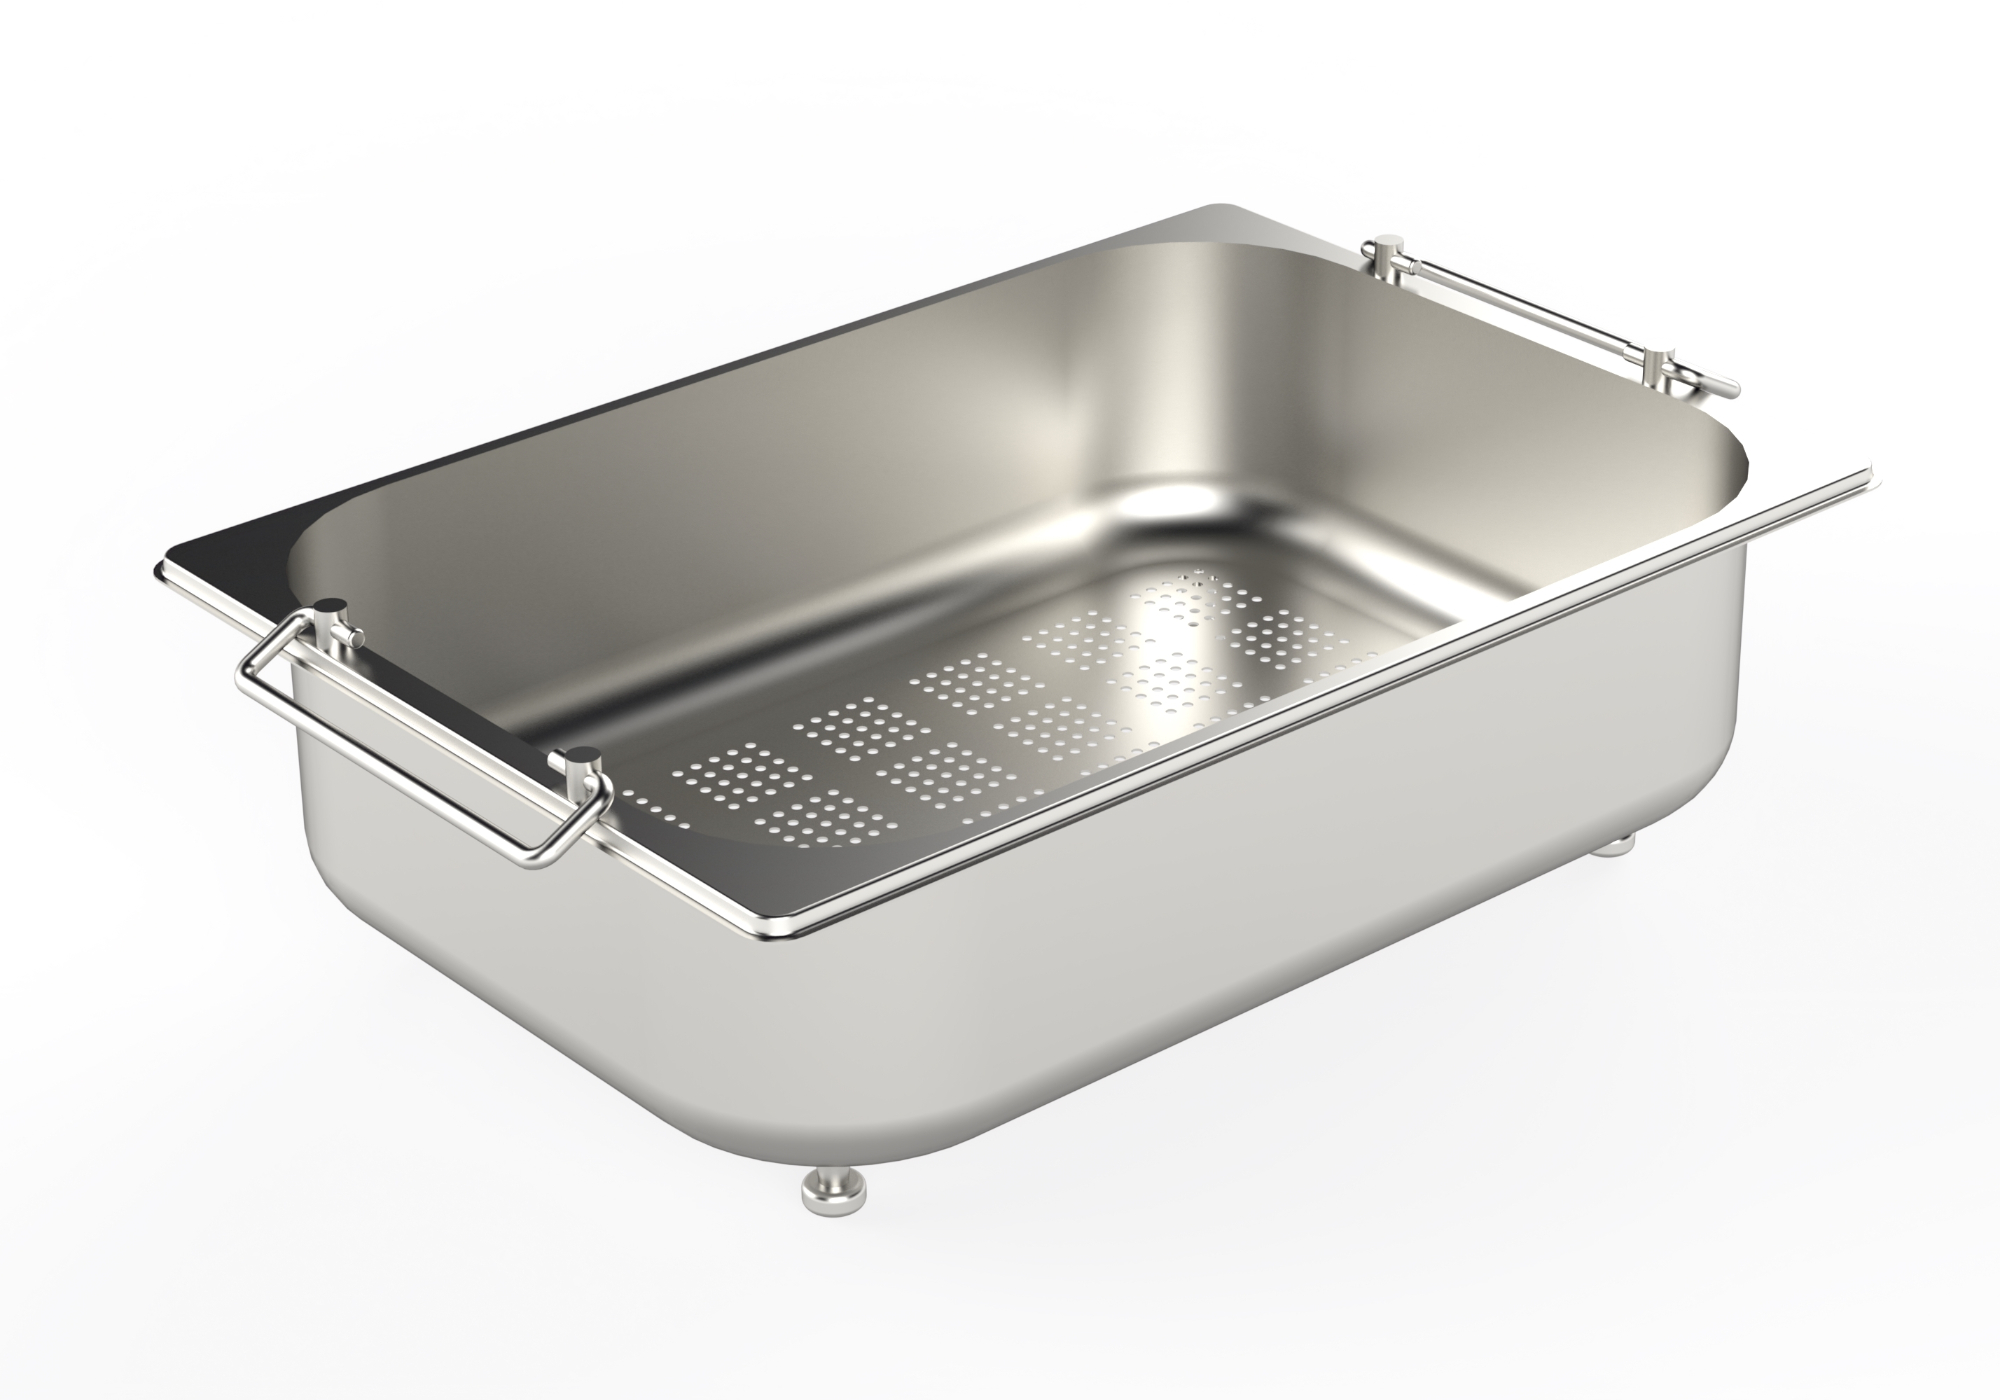 Stainless steel perforated pan